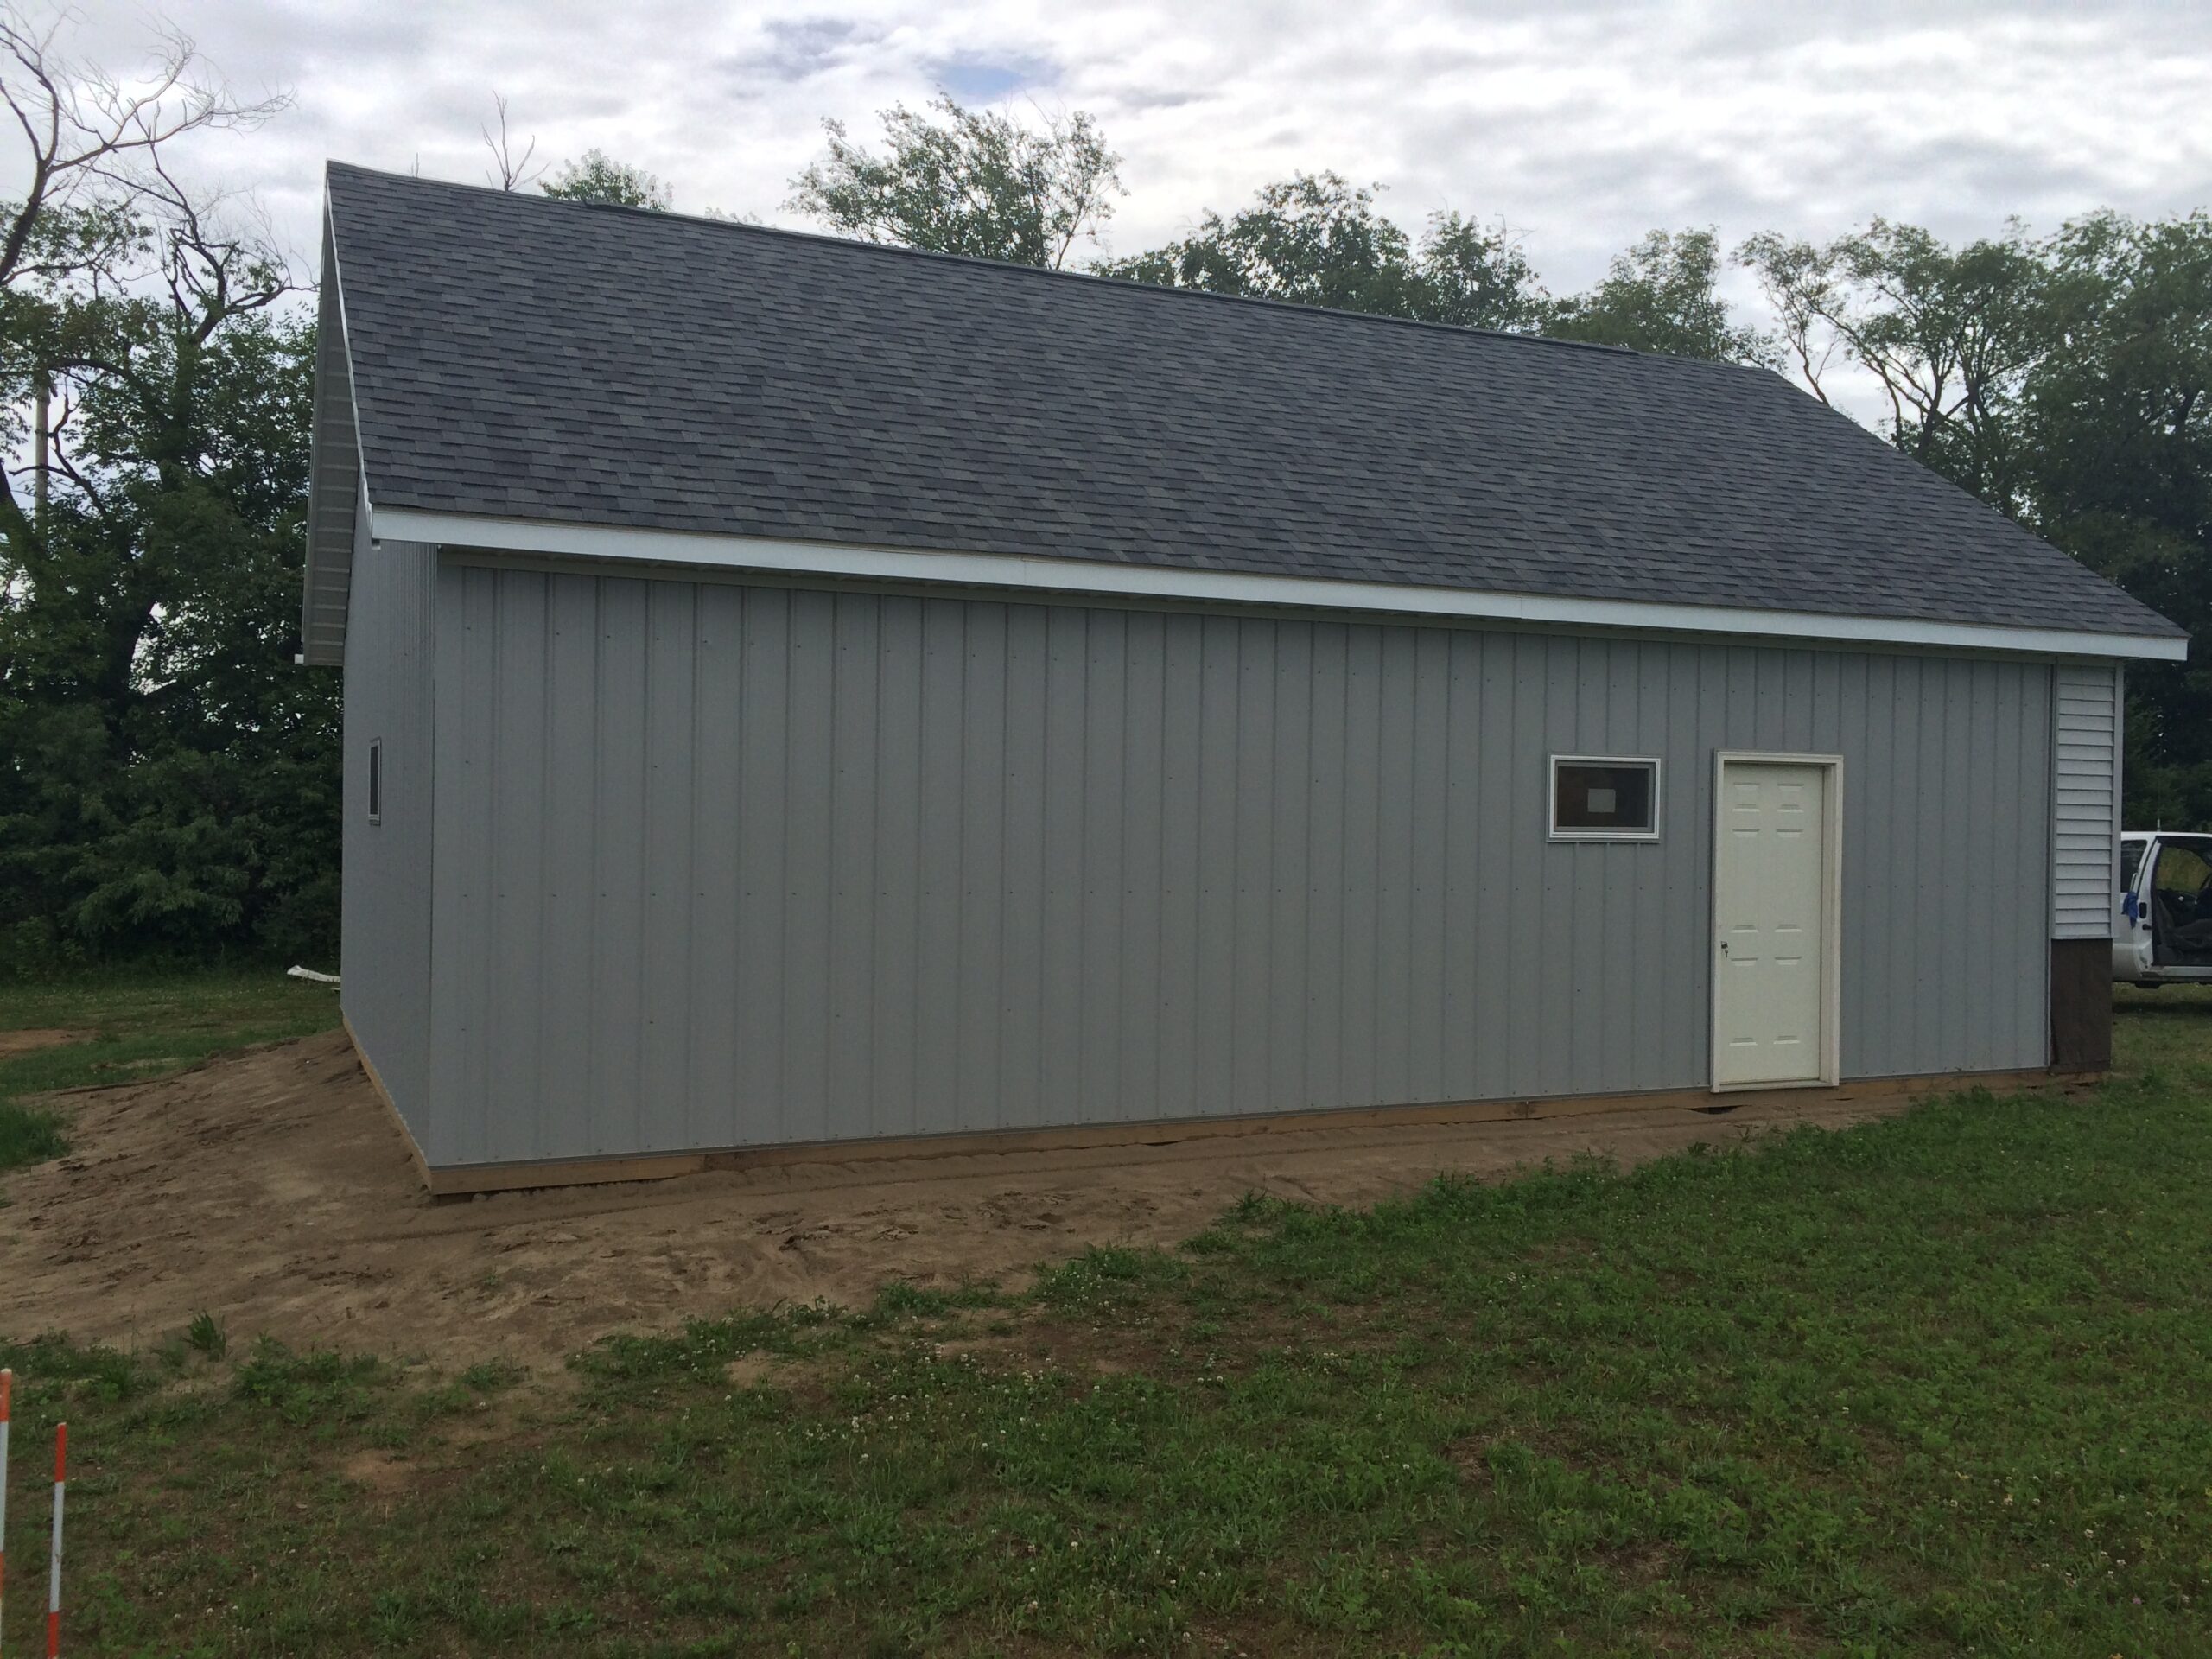 Need a Cost-Effective Building? Try a Pole Barn! - Image